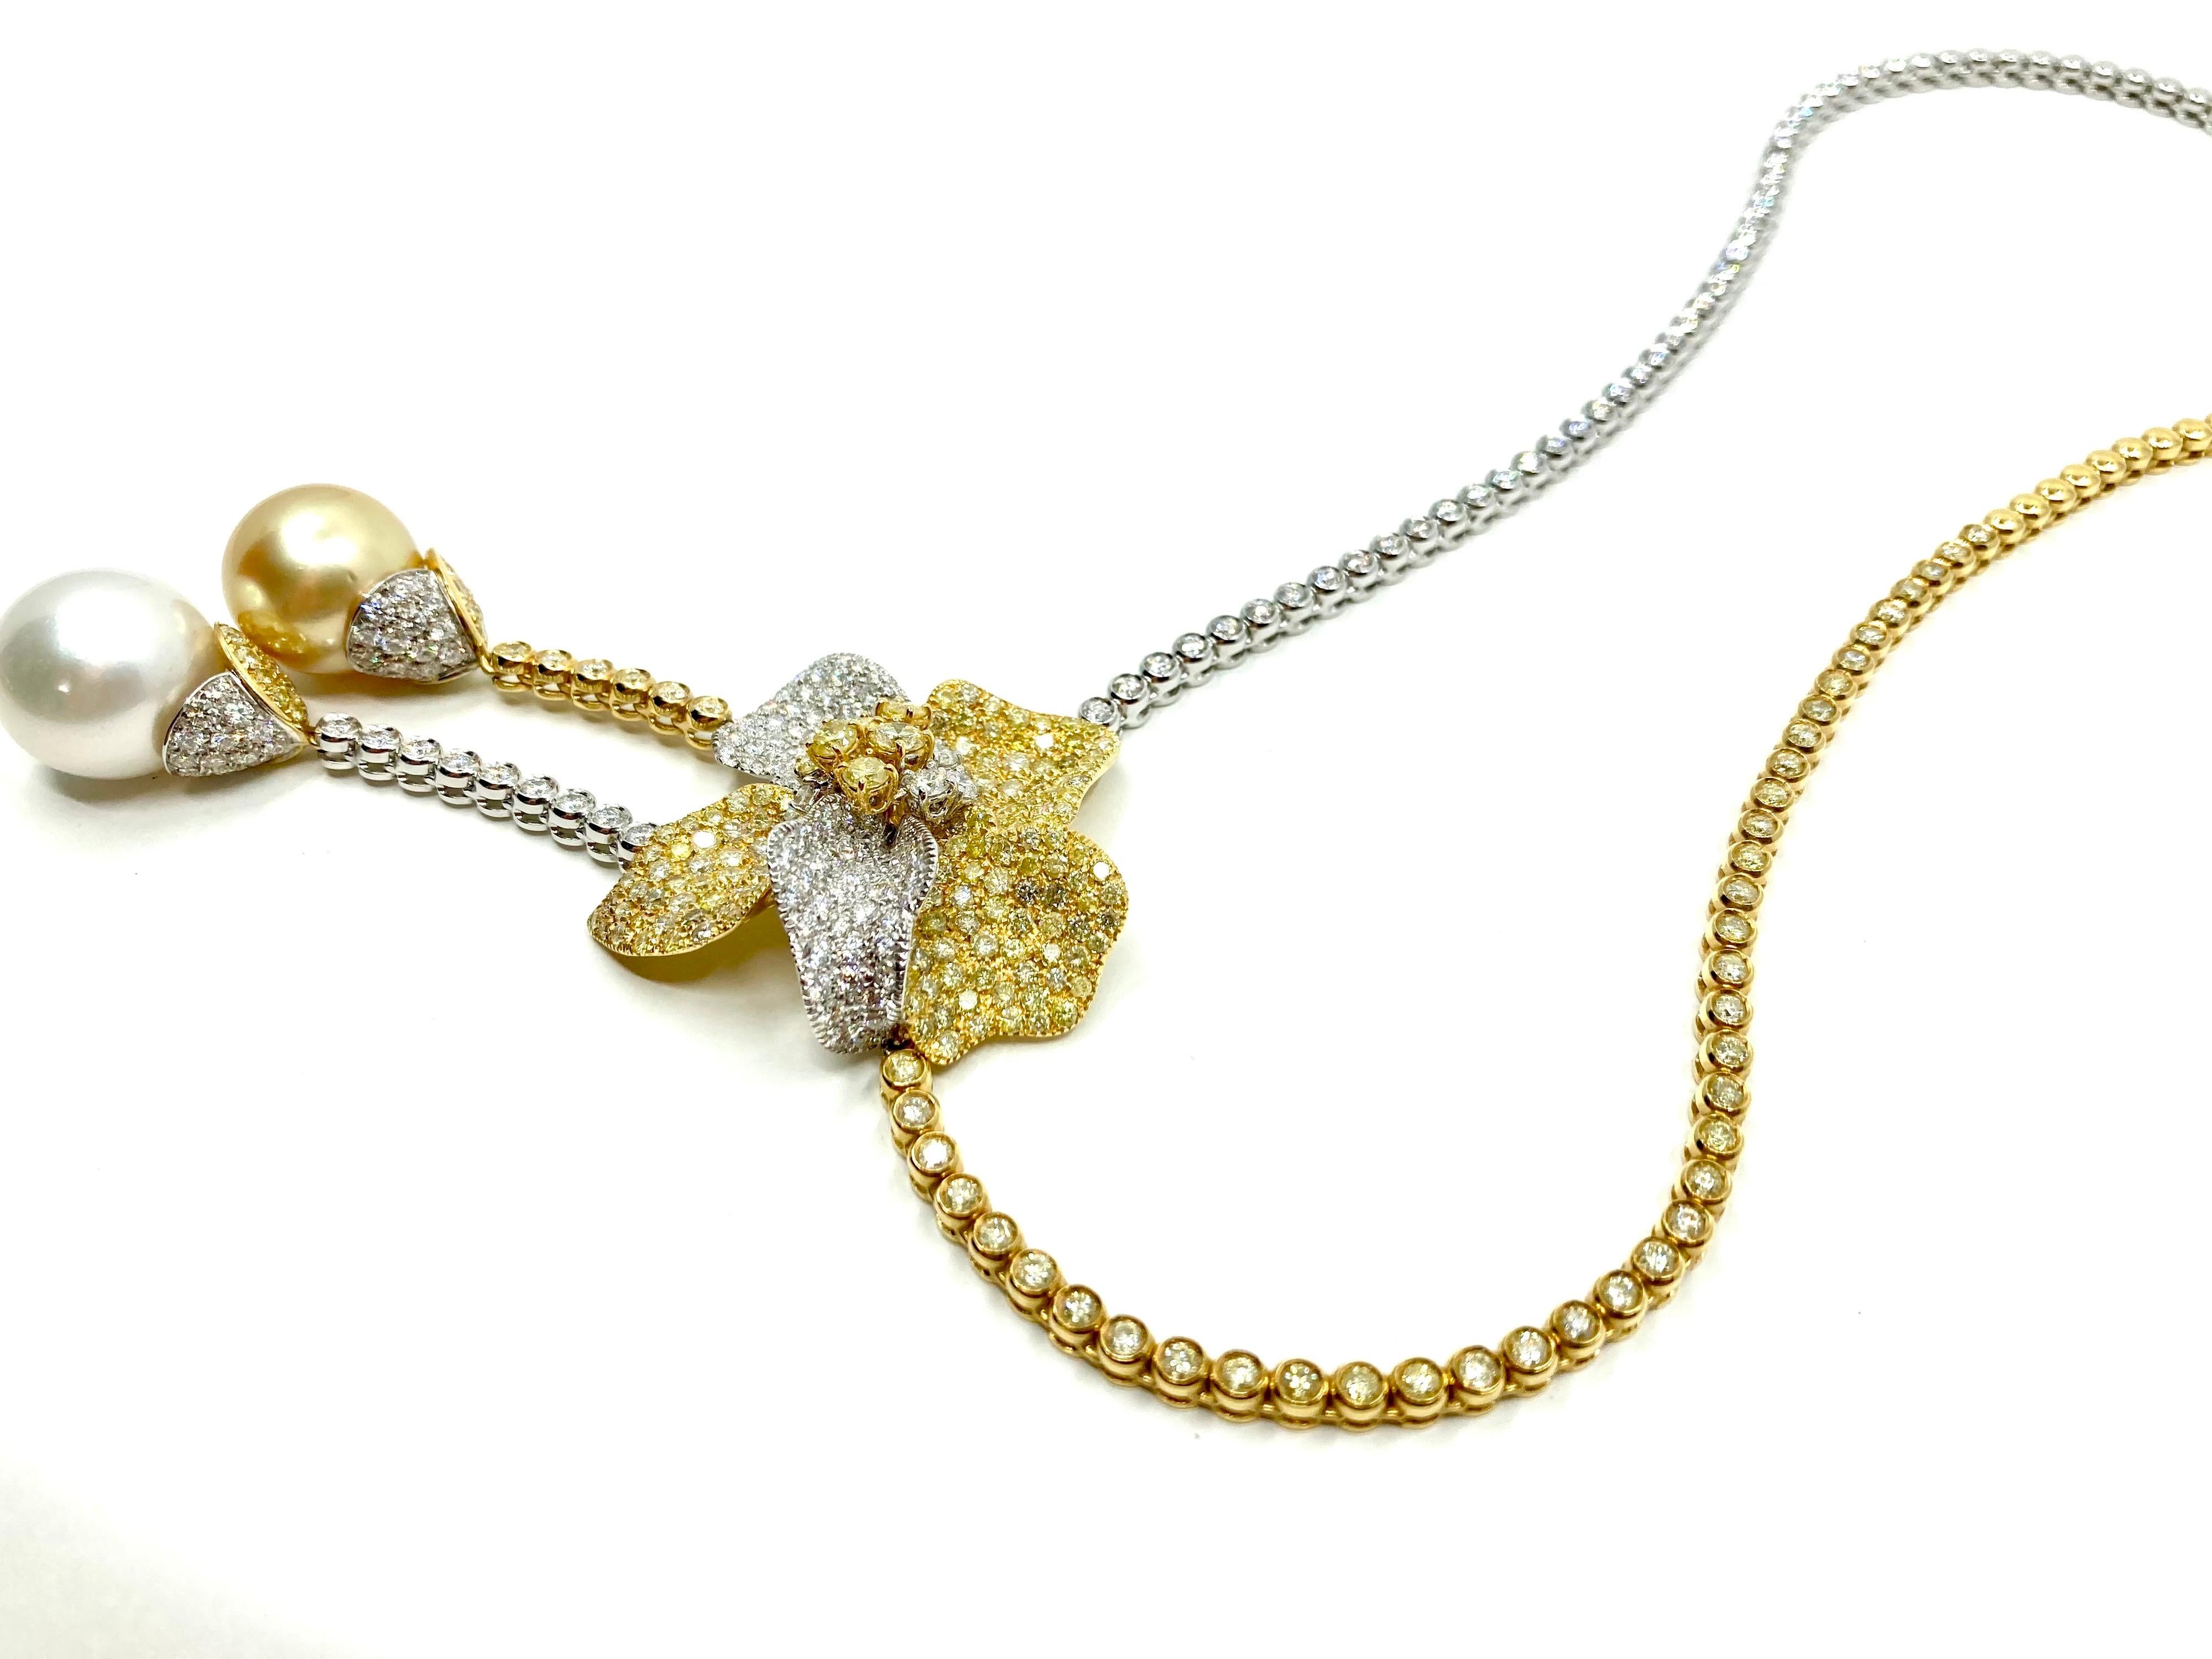 Brilliant Cut Exclusive 18 Karat White and Yellow Gold South Sea Pearl and Diamonds Necklace For Sale